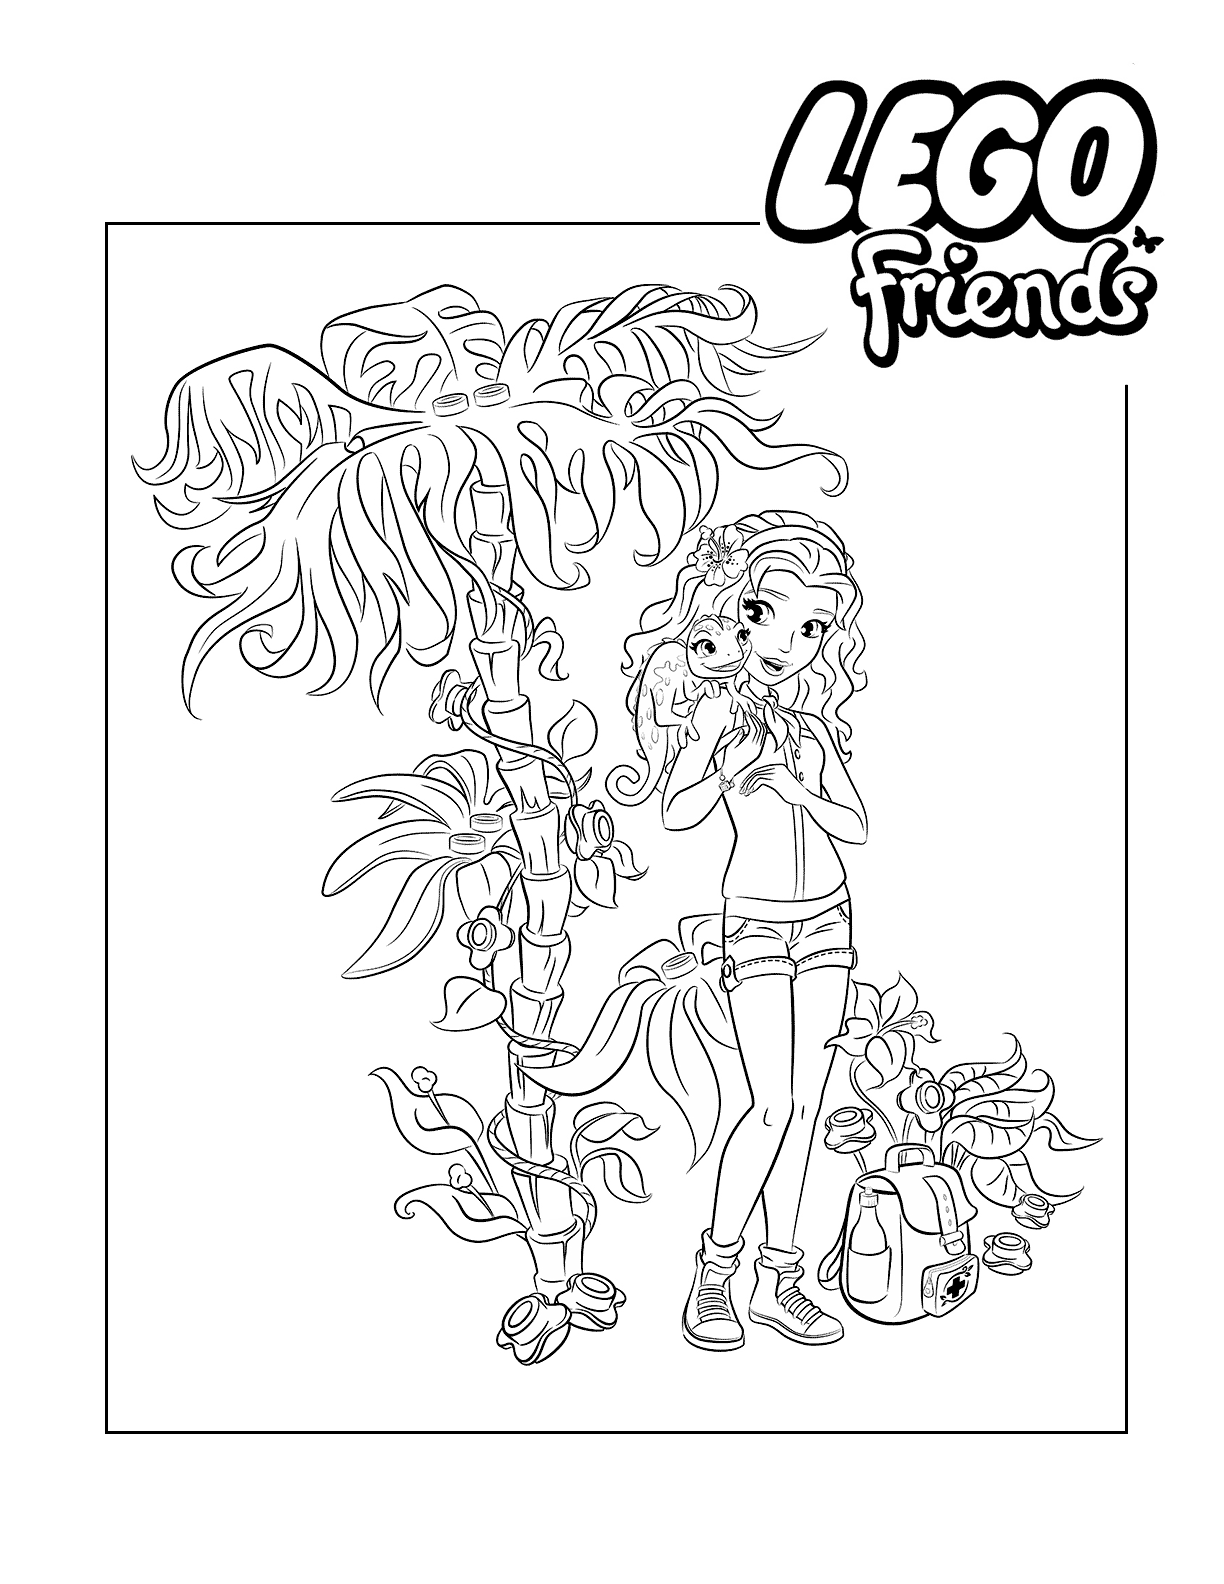 Lego Friends Emma Coloring Page